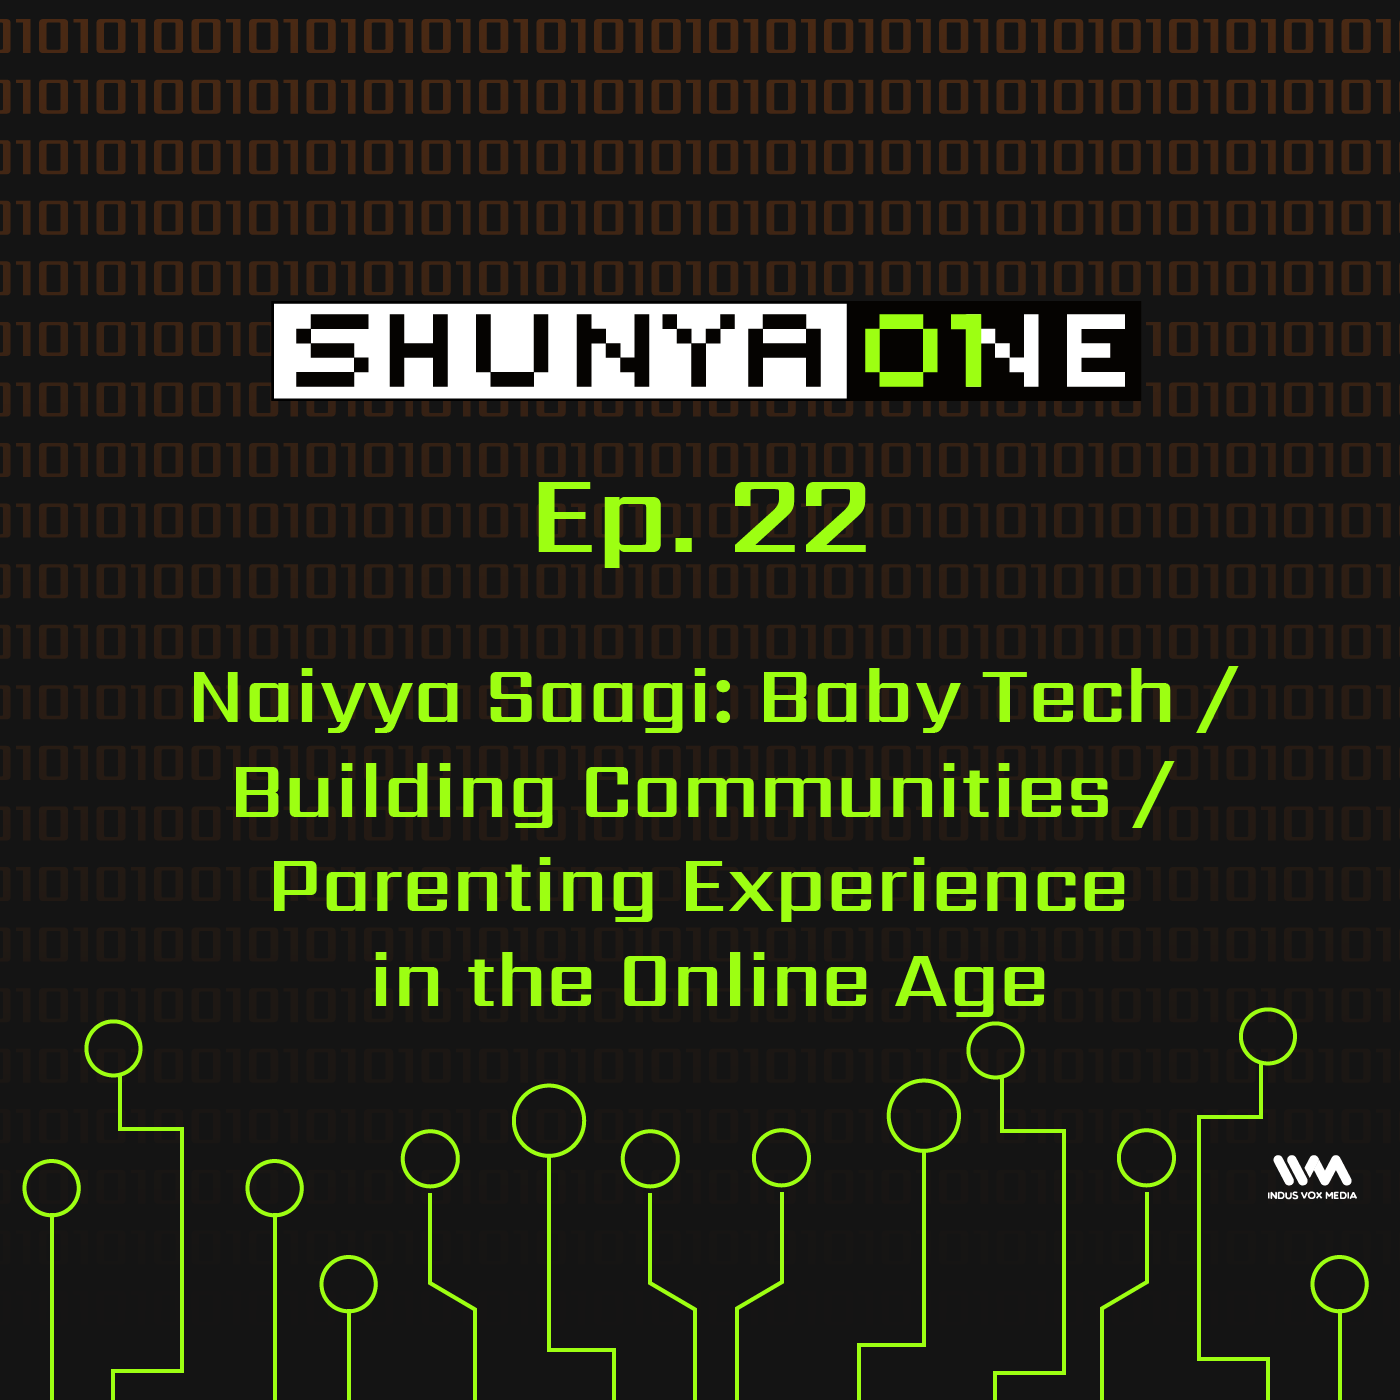 Feat. Naiyya Saggi: Baby Tech / Building Communities / Parenting Experience in the Online Age